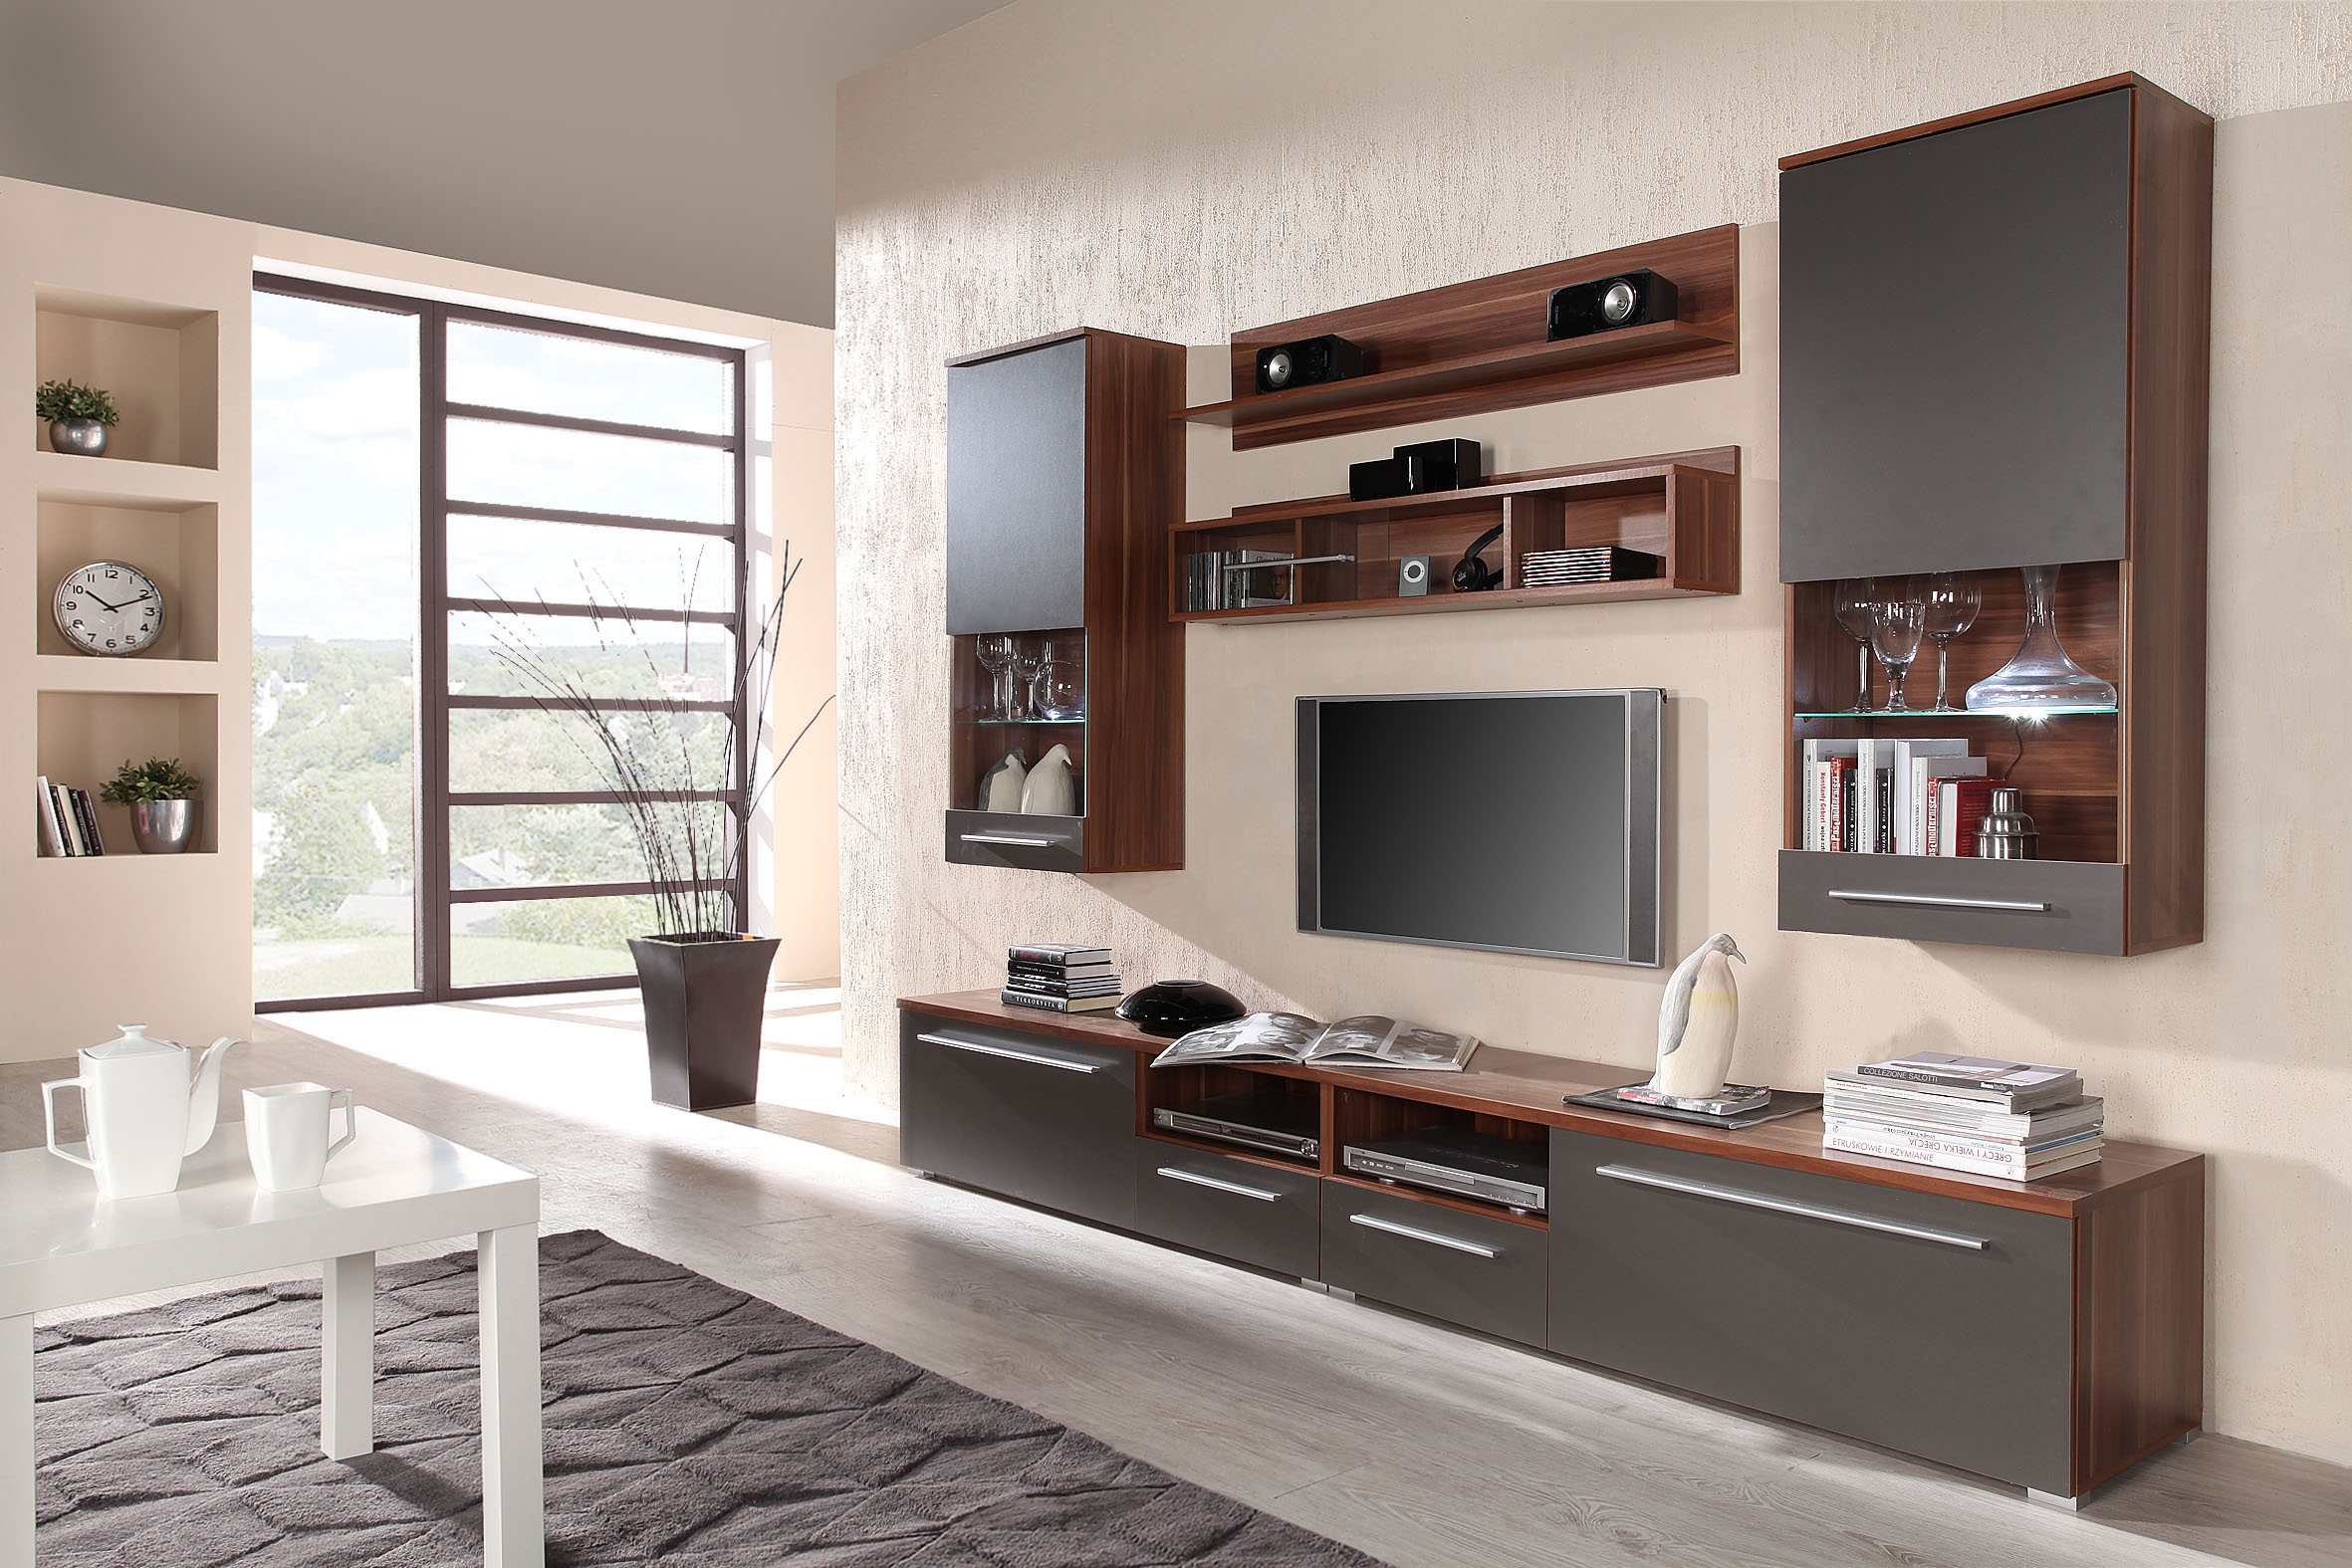 decor-ideas-unique-black-chair-and-ottoman-with-black-drum-also-models-modern-wall-unit-furniture-picture-modern-entertainment wall unit